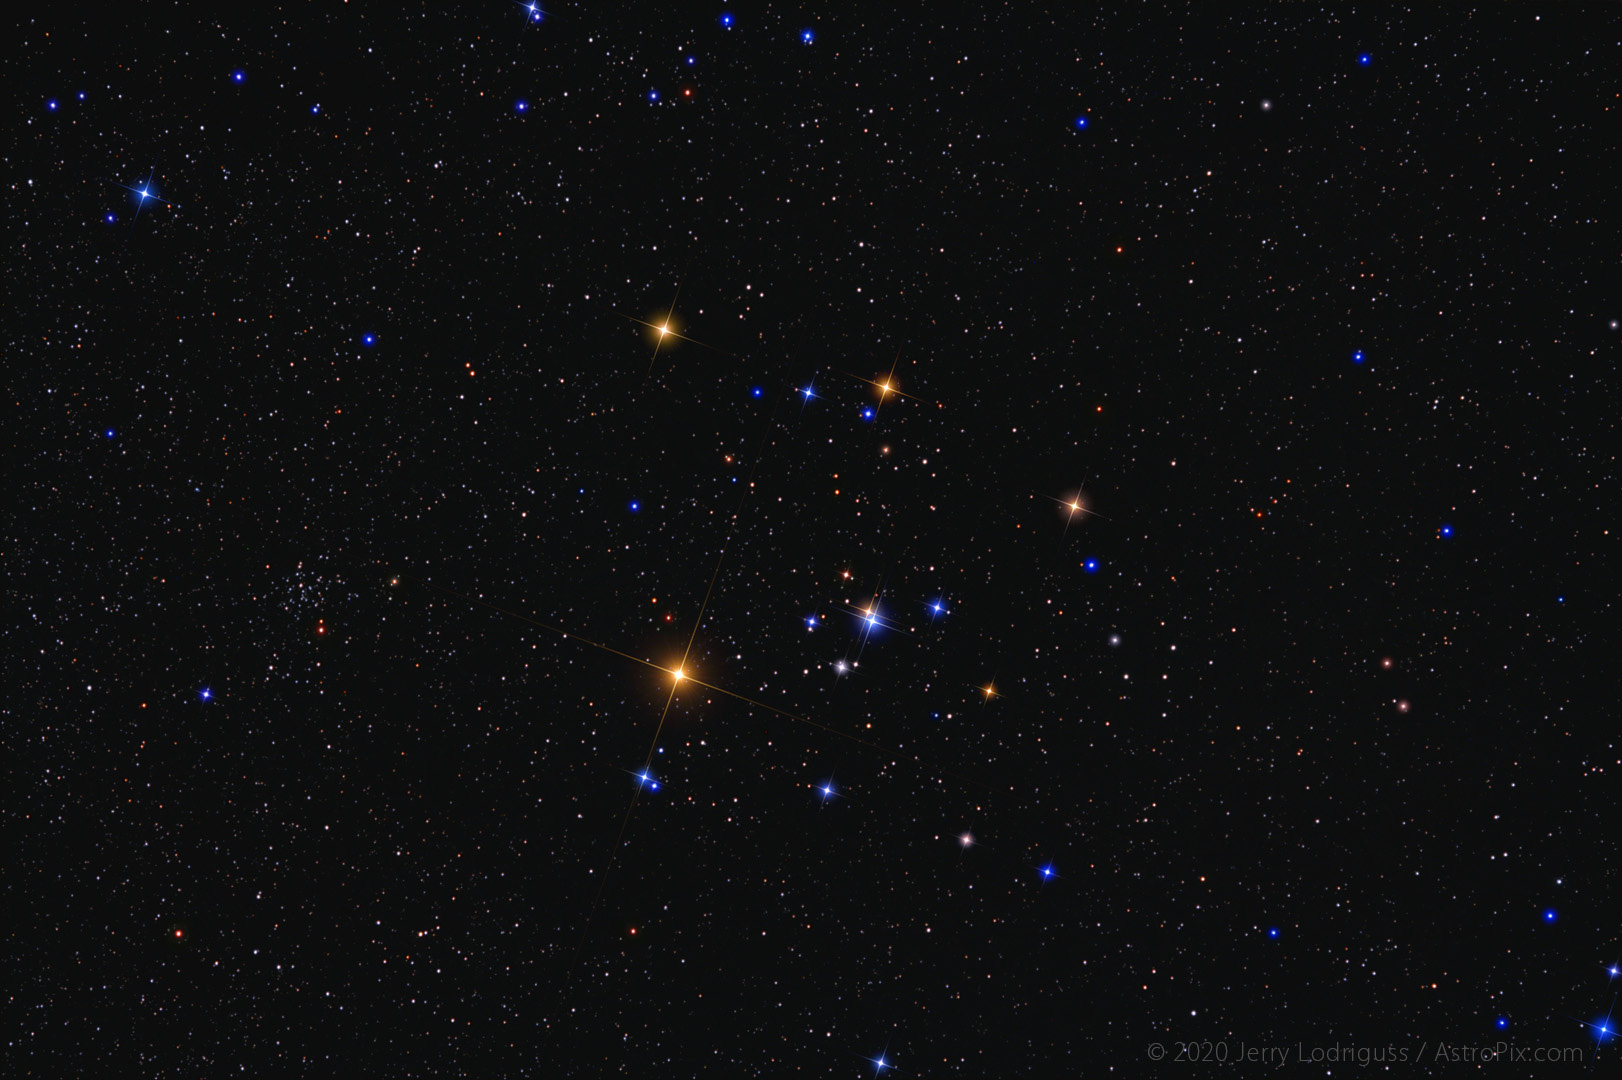 The Hyades open star cluster, Mel 25, is located in the constellation of Taurus.